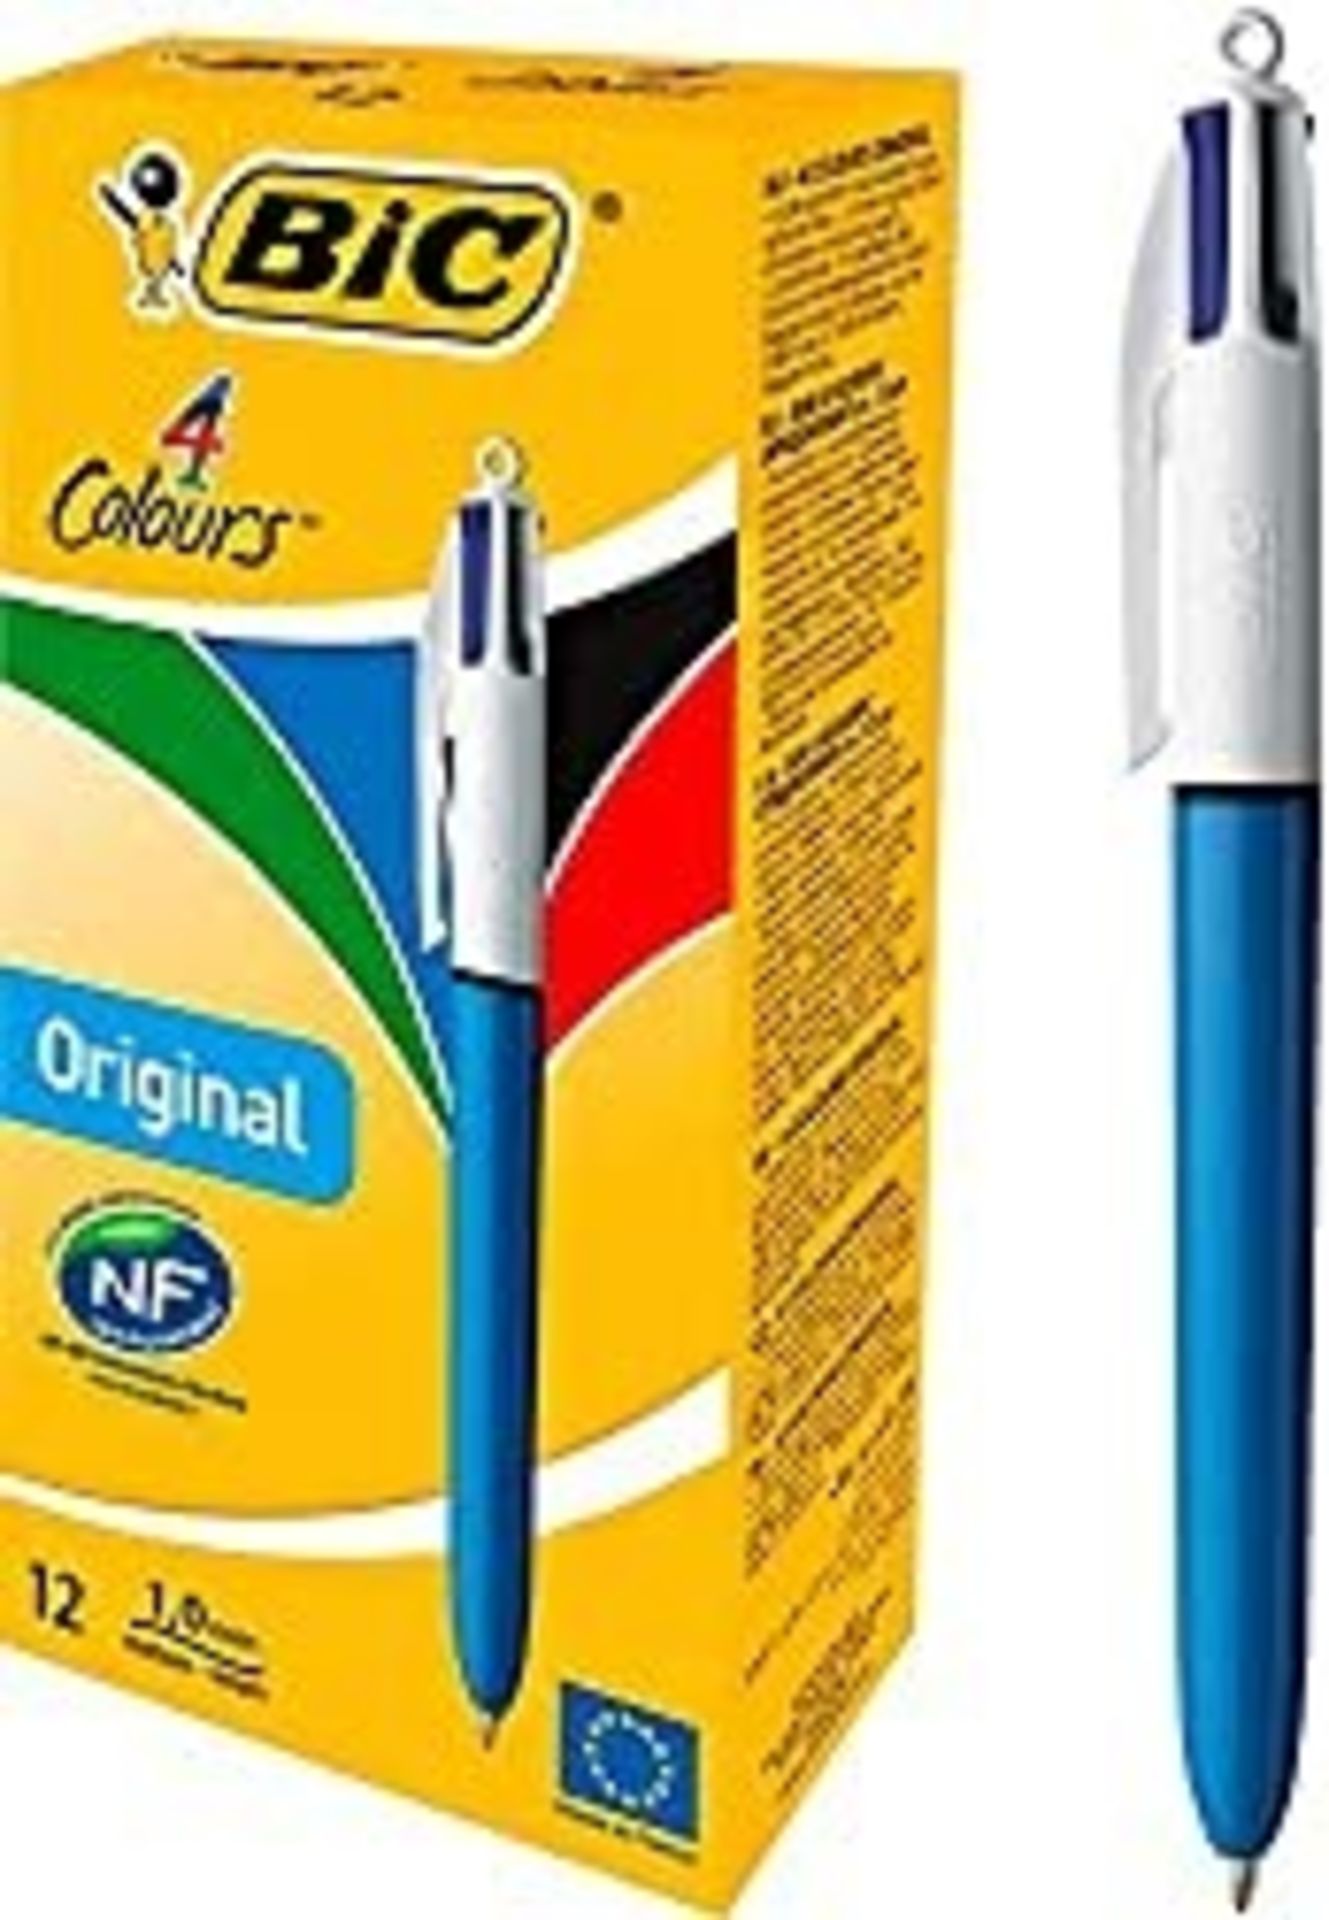 COMBINED RRP £105.00 LOT TO CONTAIN 11 ASSORTED Office Products: BIC, LAMY, Tipp-Ex, Colouring, - Image 2 of 12